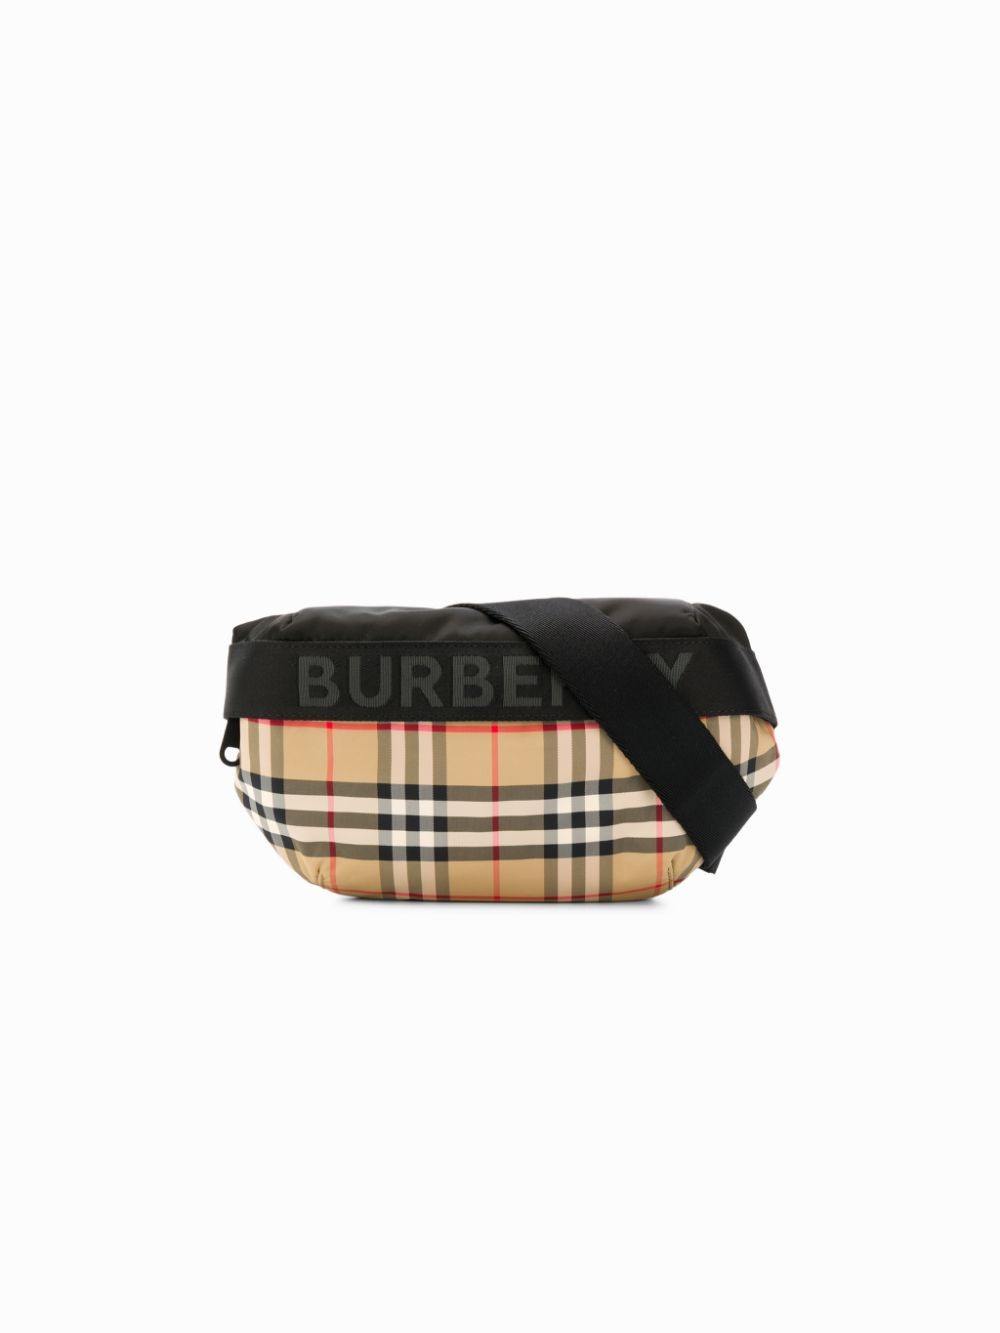 burberry SONNY BAG available on montiboutique.com - 32360